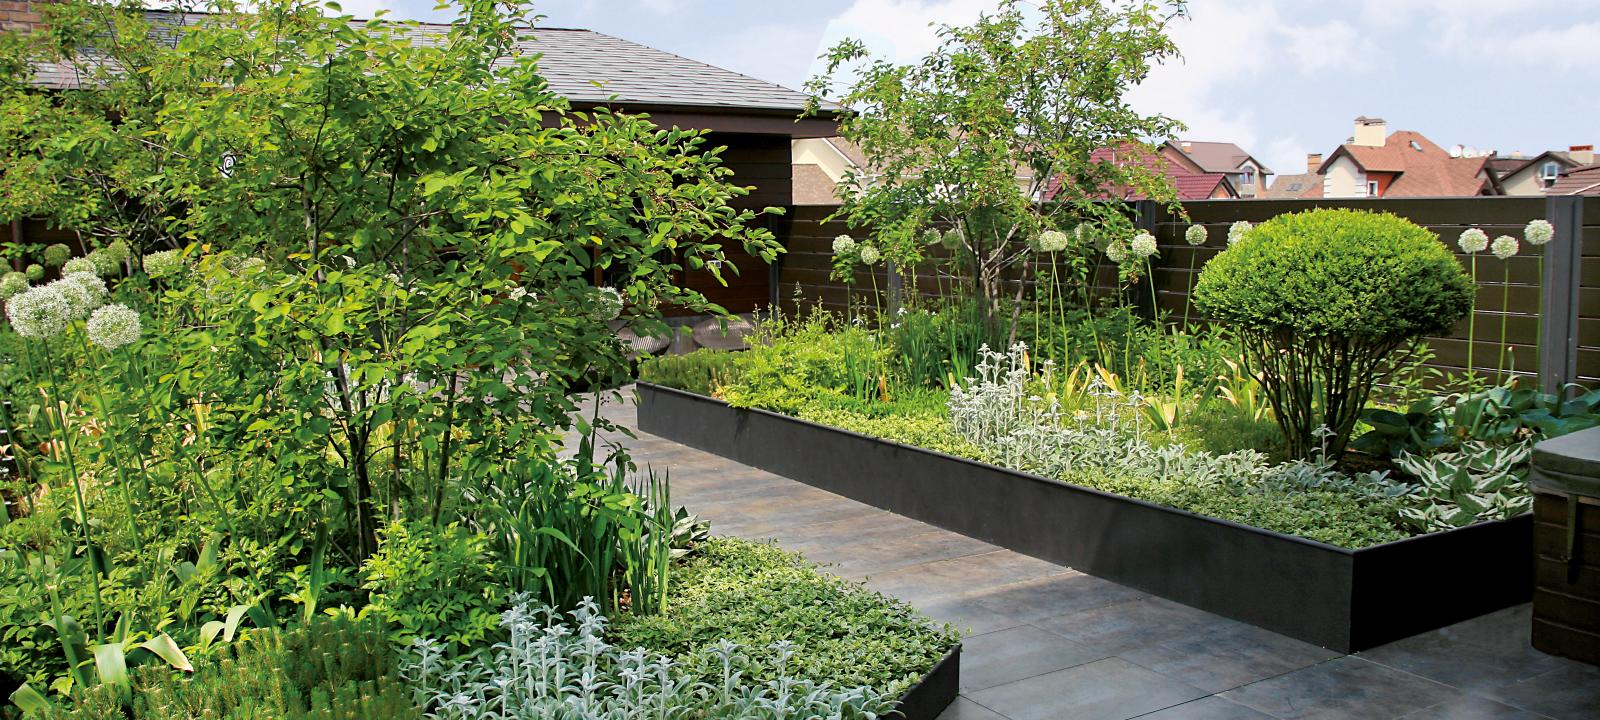 Roof garden with natural stone paving